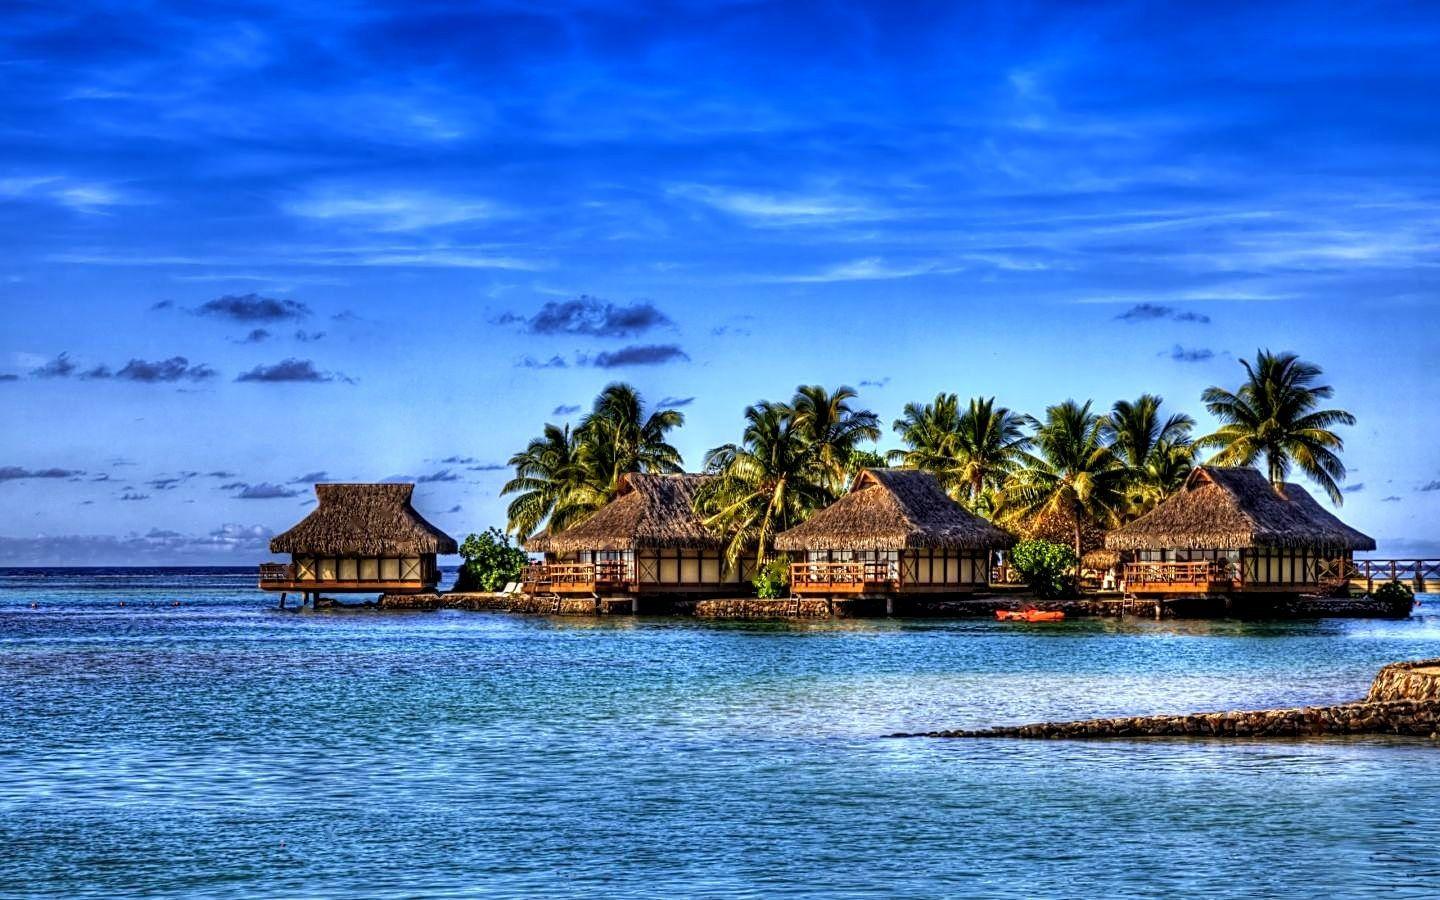 Oceans: Ocean Houses Just Tropical Relax Relaxation Wallpaper